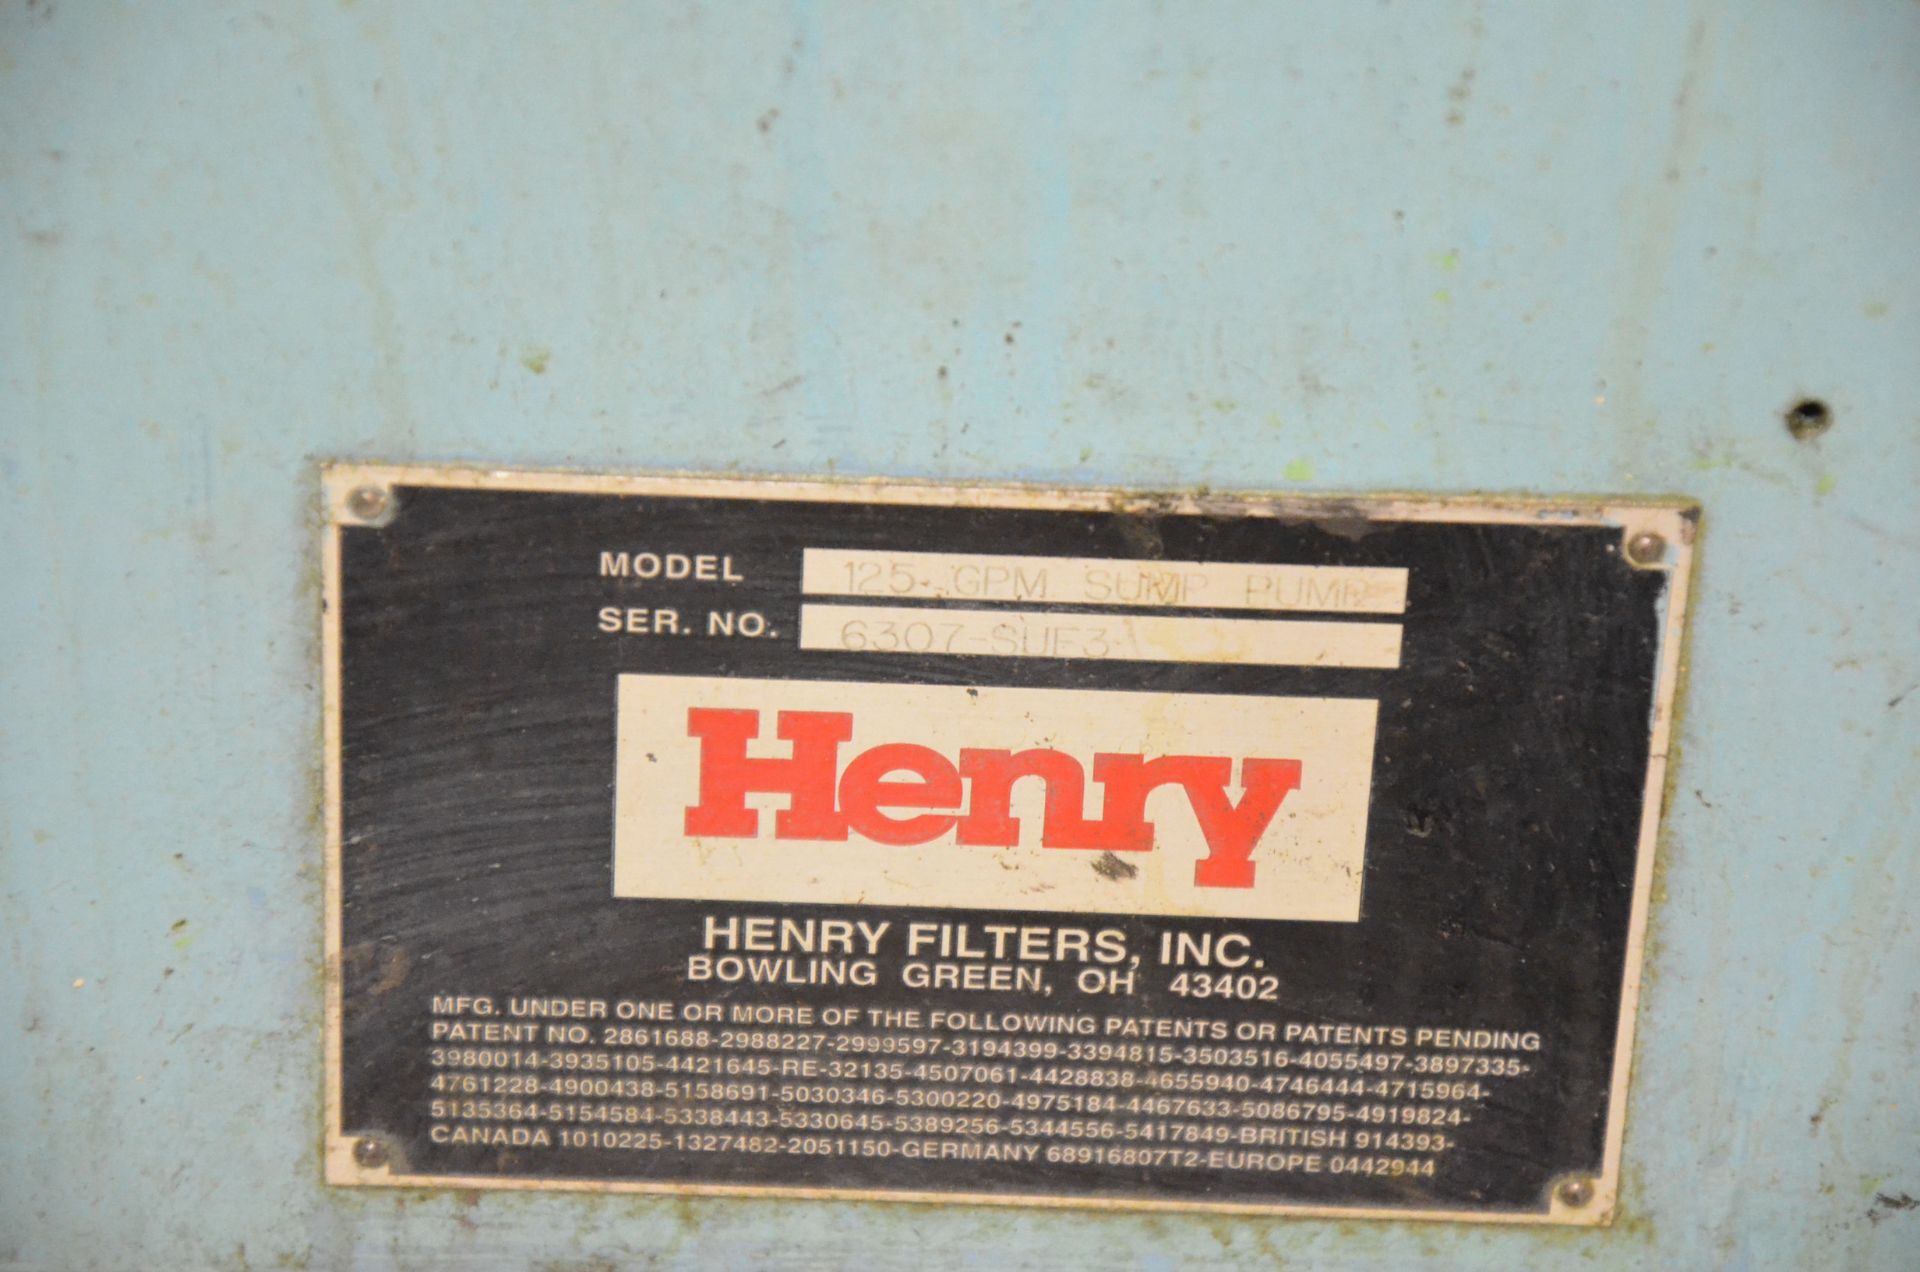 BARNES-HENRY COOLANT FILTRATION SYSTEM WITH HENRY 125 GPM PUMP, ROSEDALE LCO-8 2-STAGE BAG TYPE - Image 3 of 8